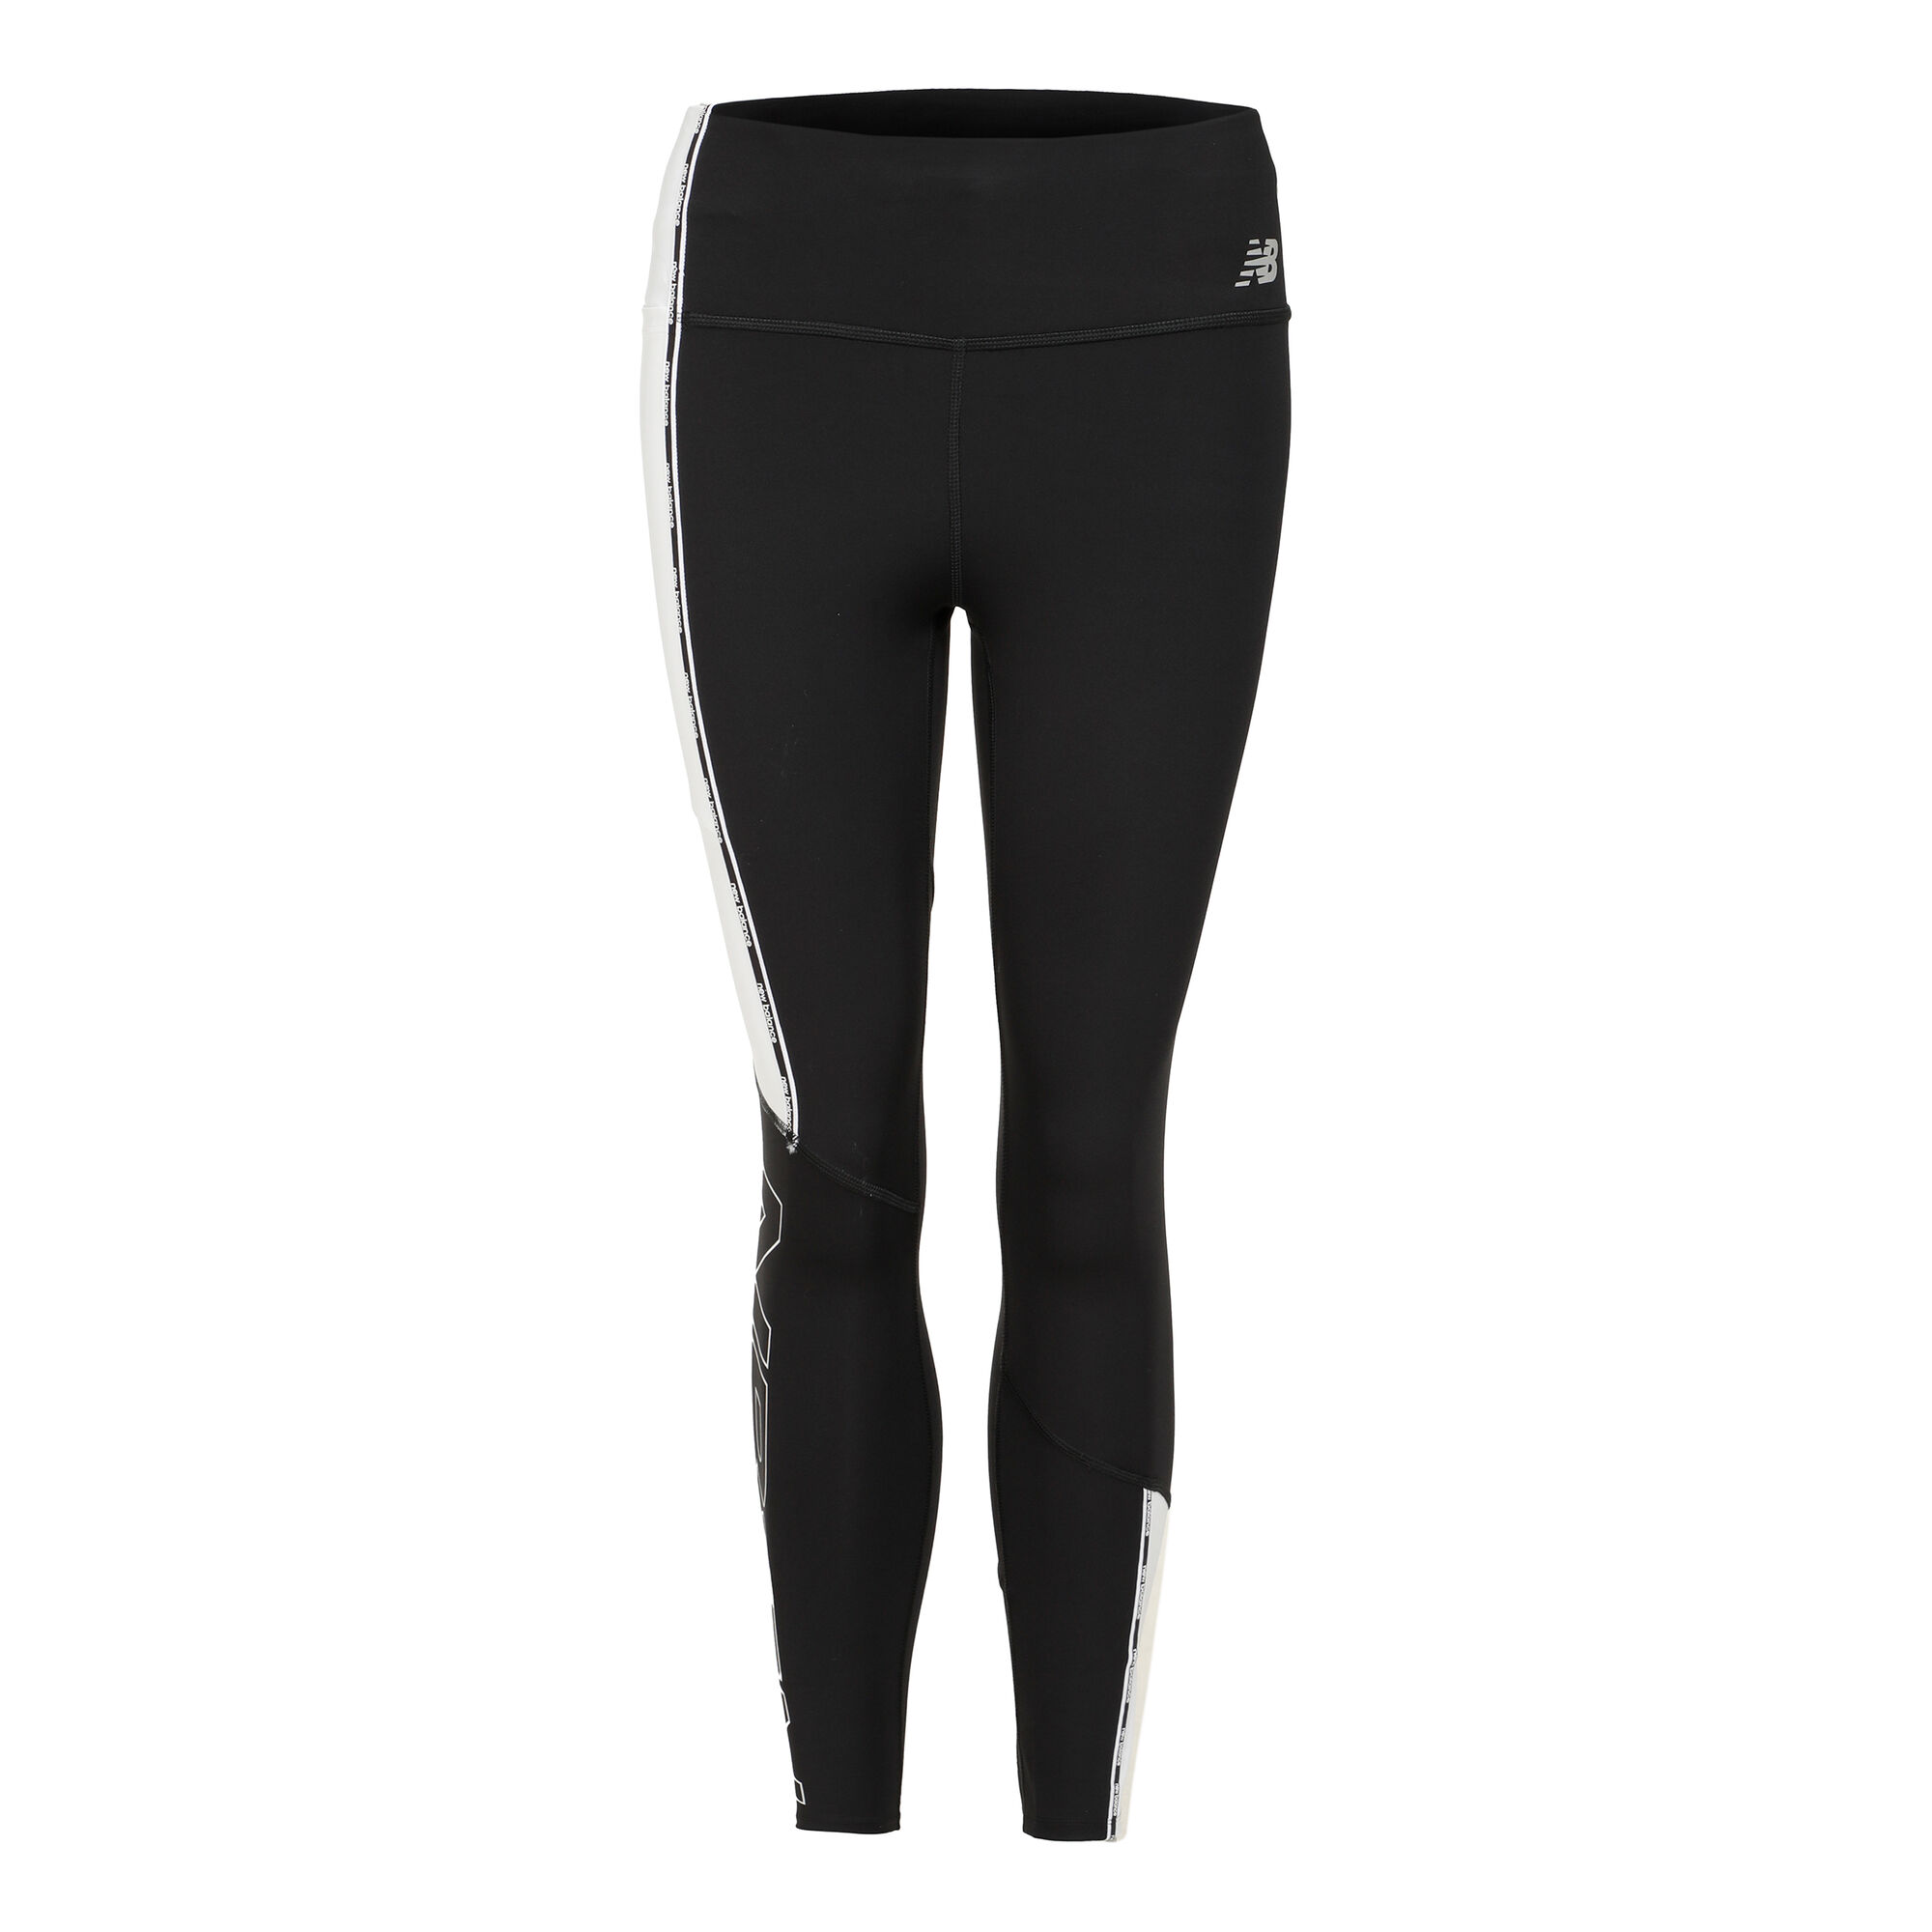 Buy New Balance Accelerate Pacer 7/8 Tight Women Black, White online